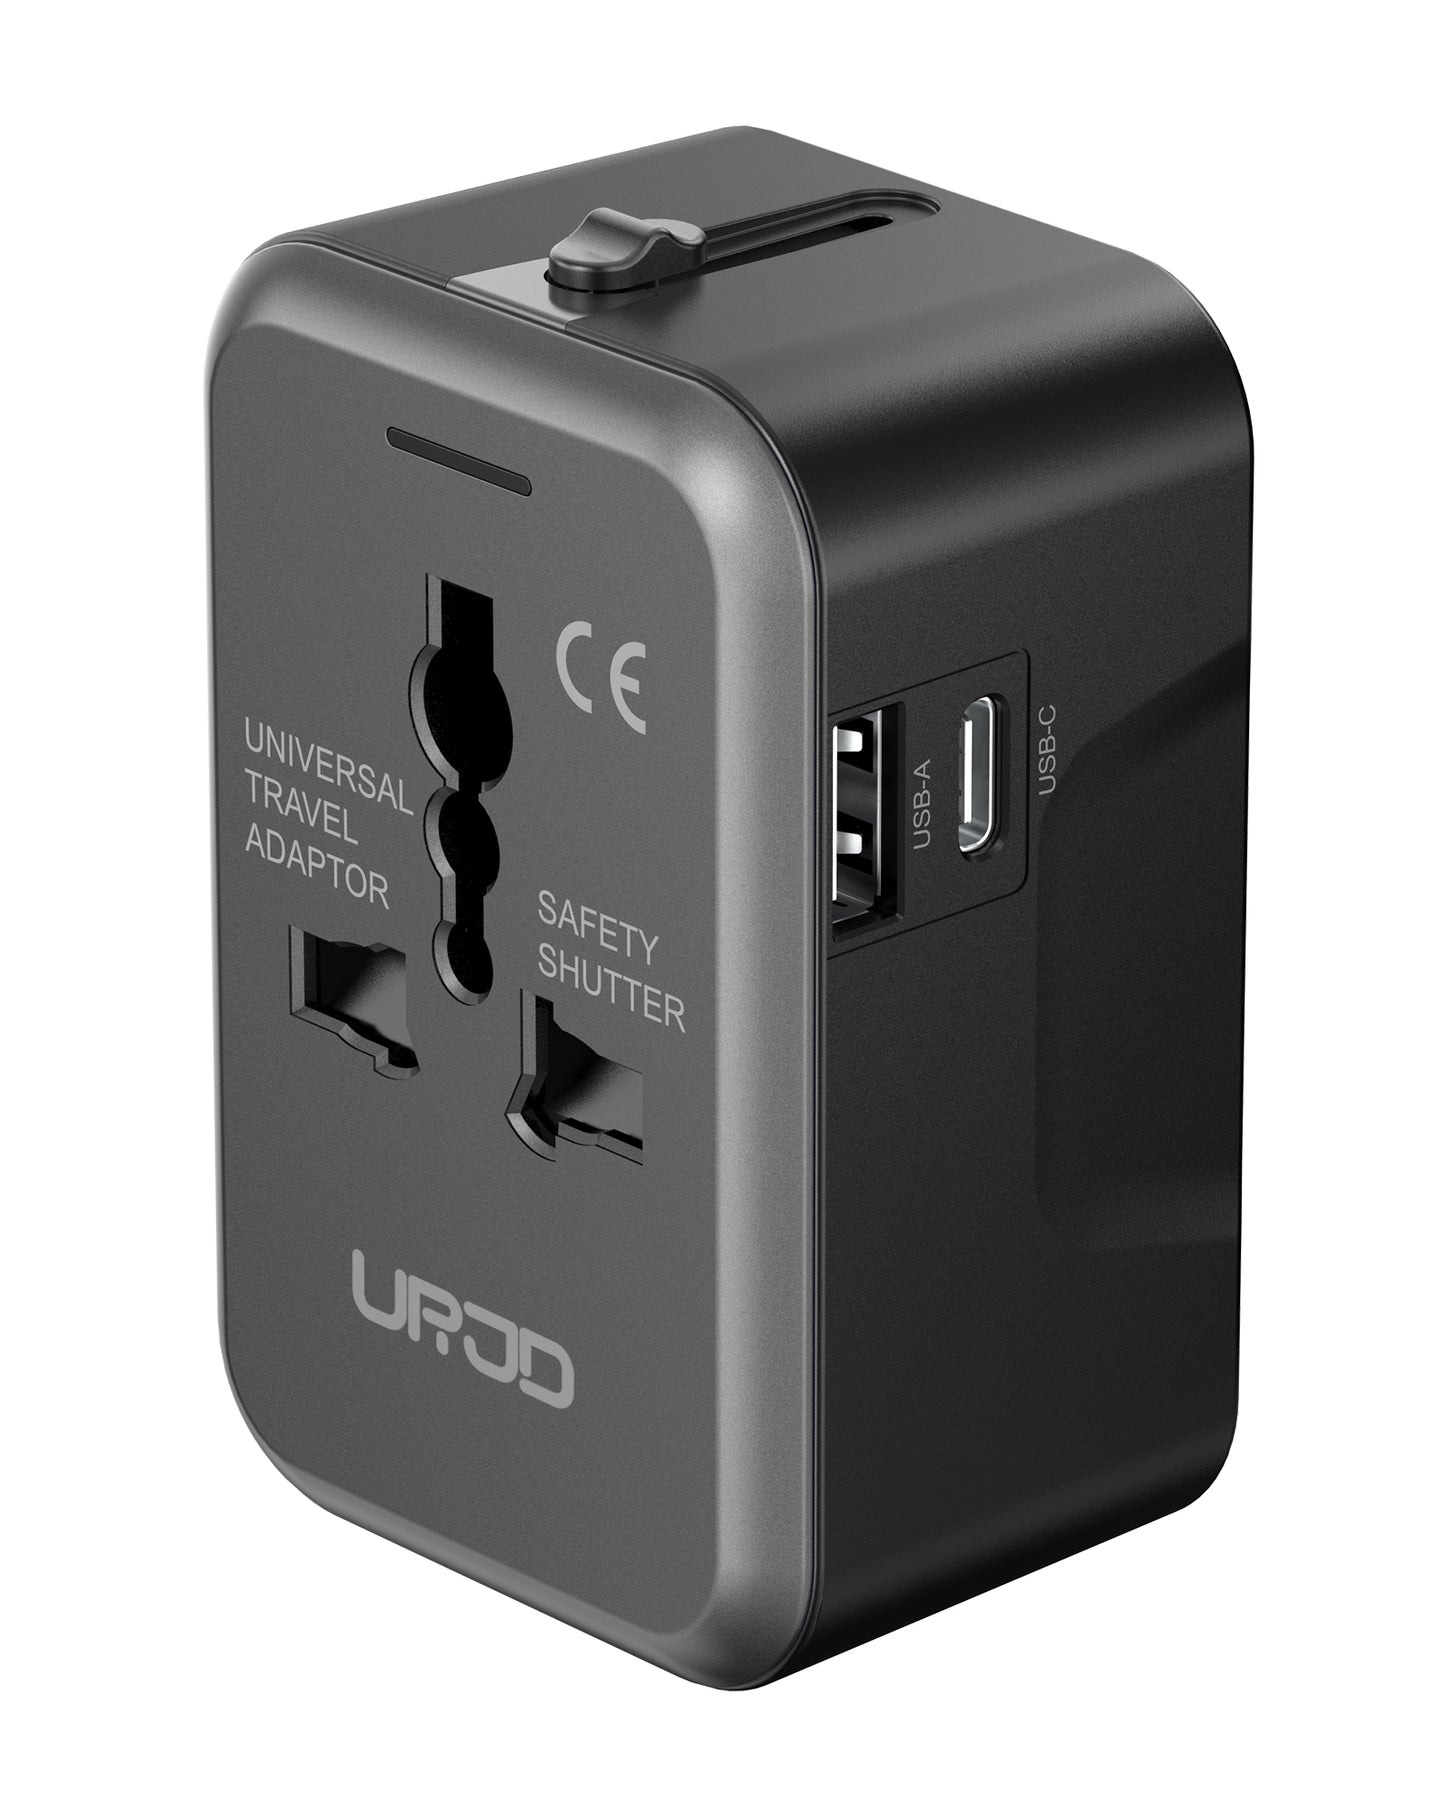 Universal Travel Adapter with (Type C+USB) 2 USB Ports & AC Outlet, International Plug Adapter Converter, Type C/A/G/I All in One Wall Charger Worldwide Travel Adaptor for US to EU UK AUS Asia